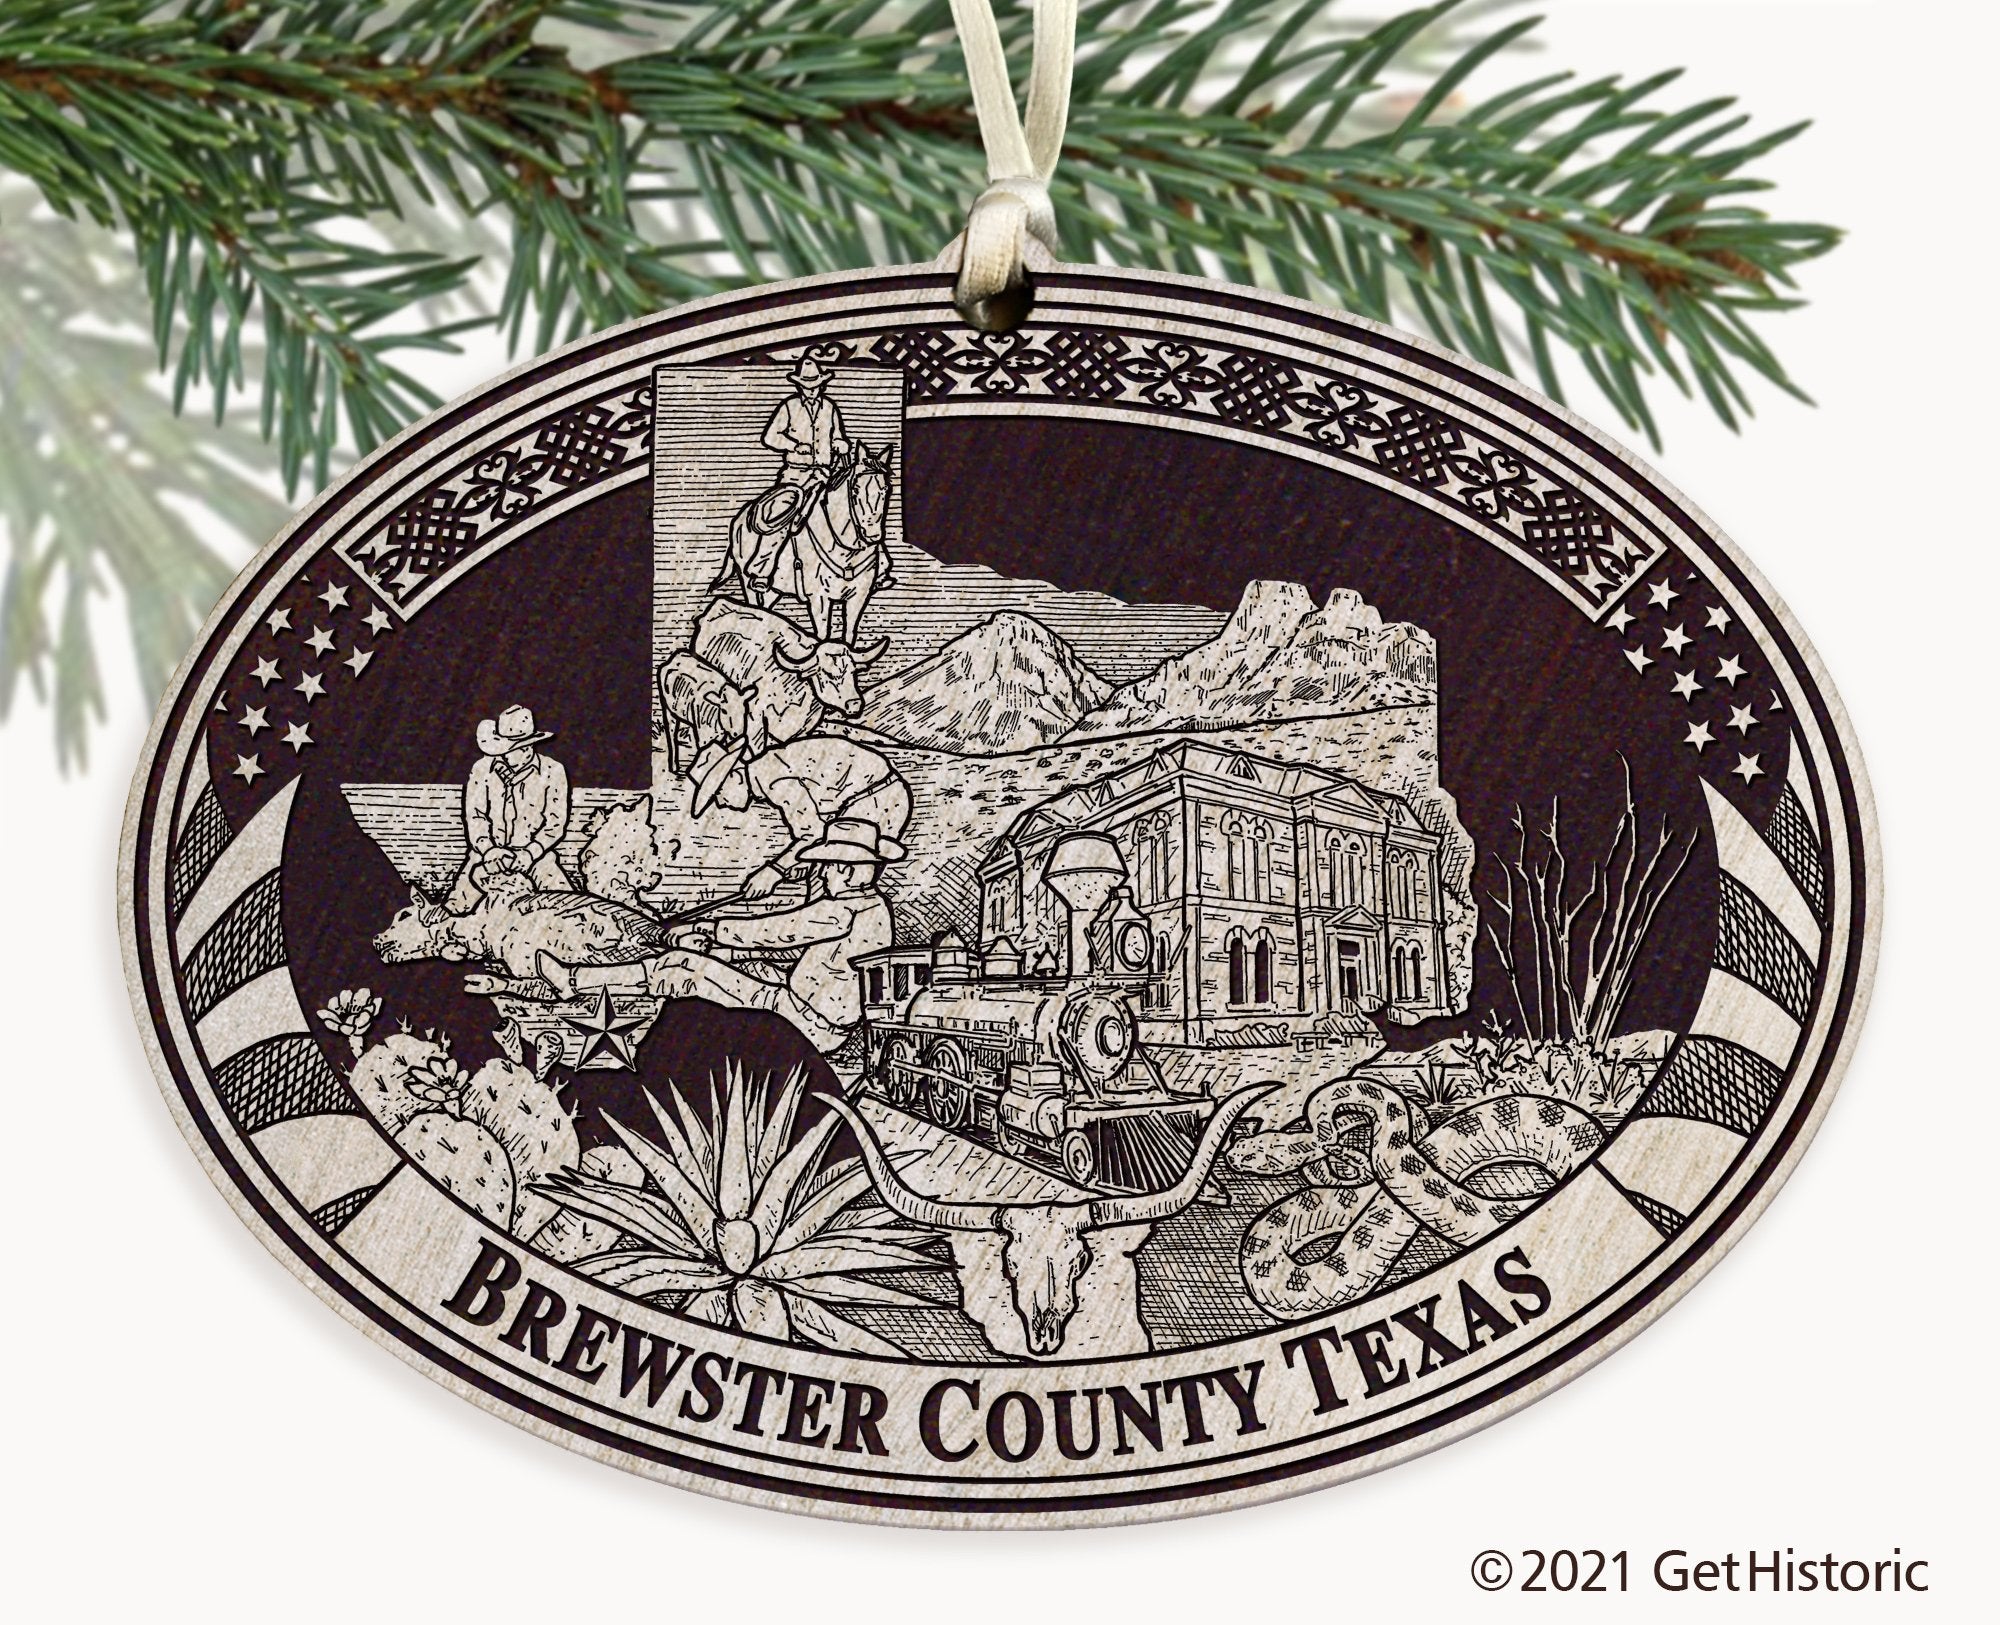 Brewster County Texas Engraved Ornament